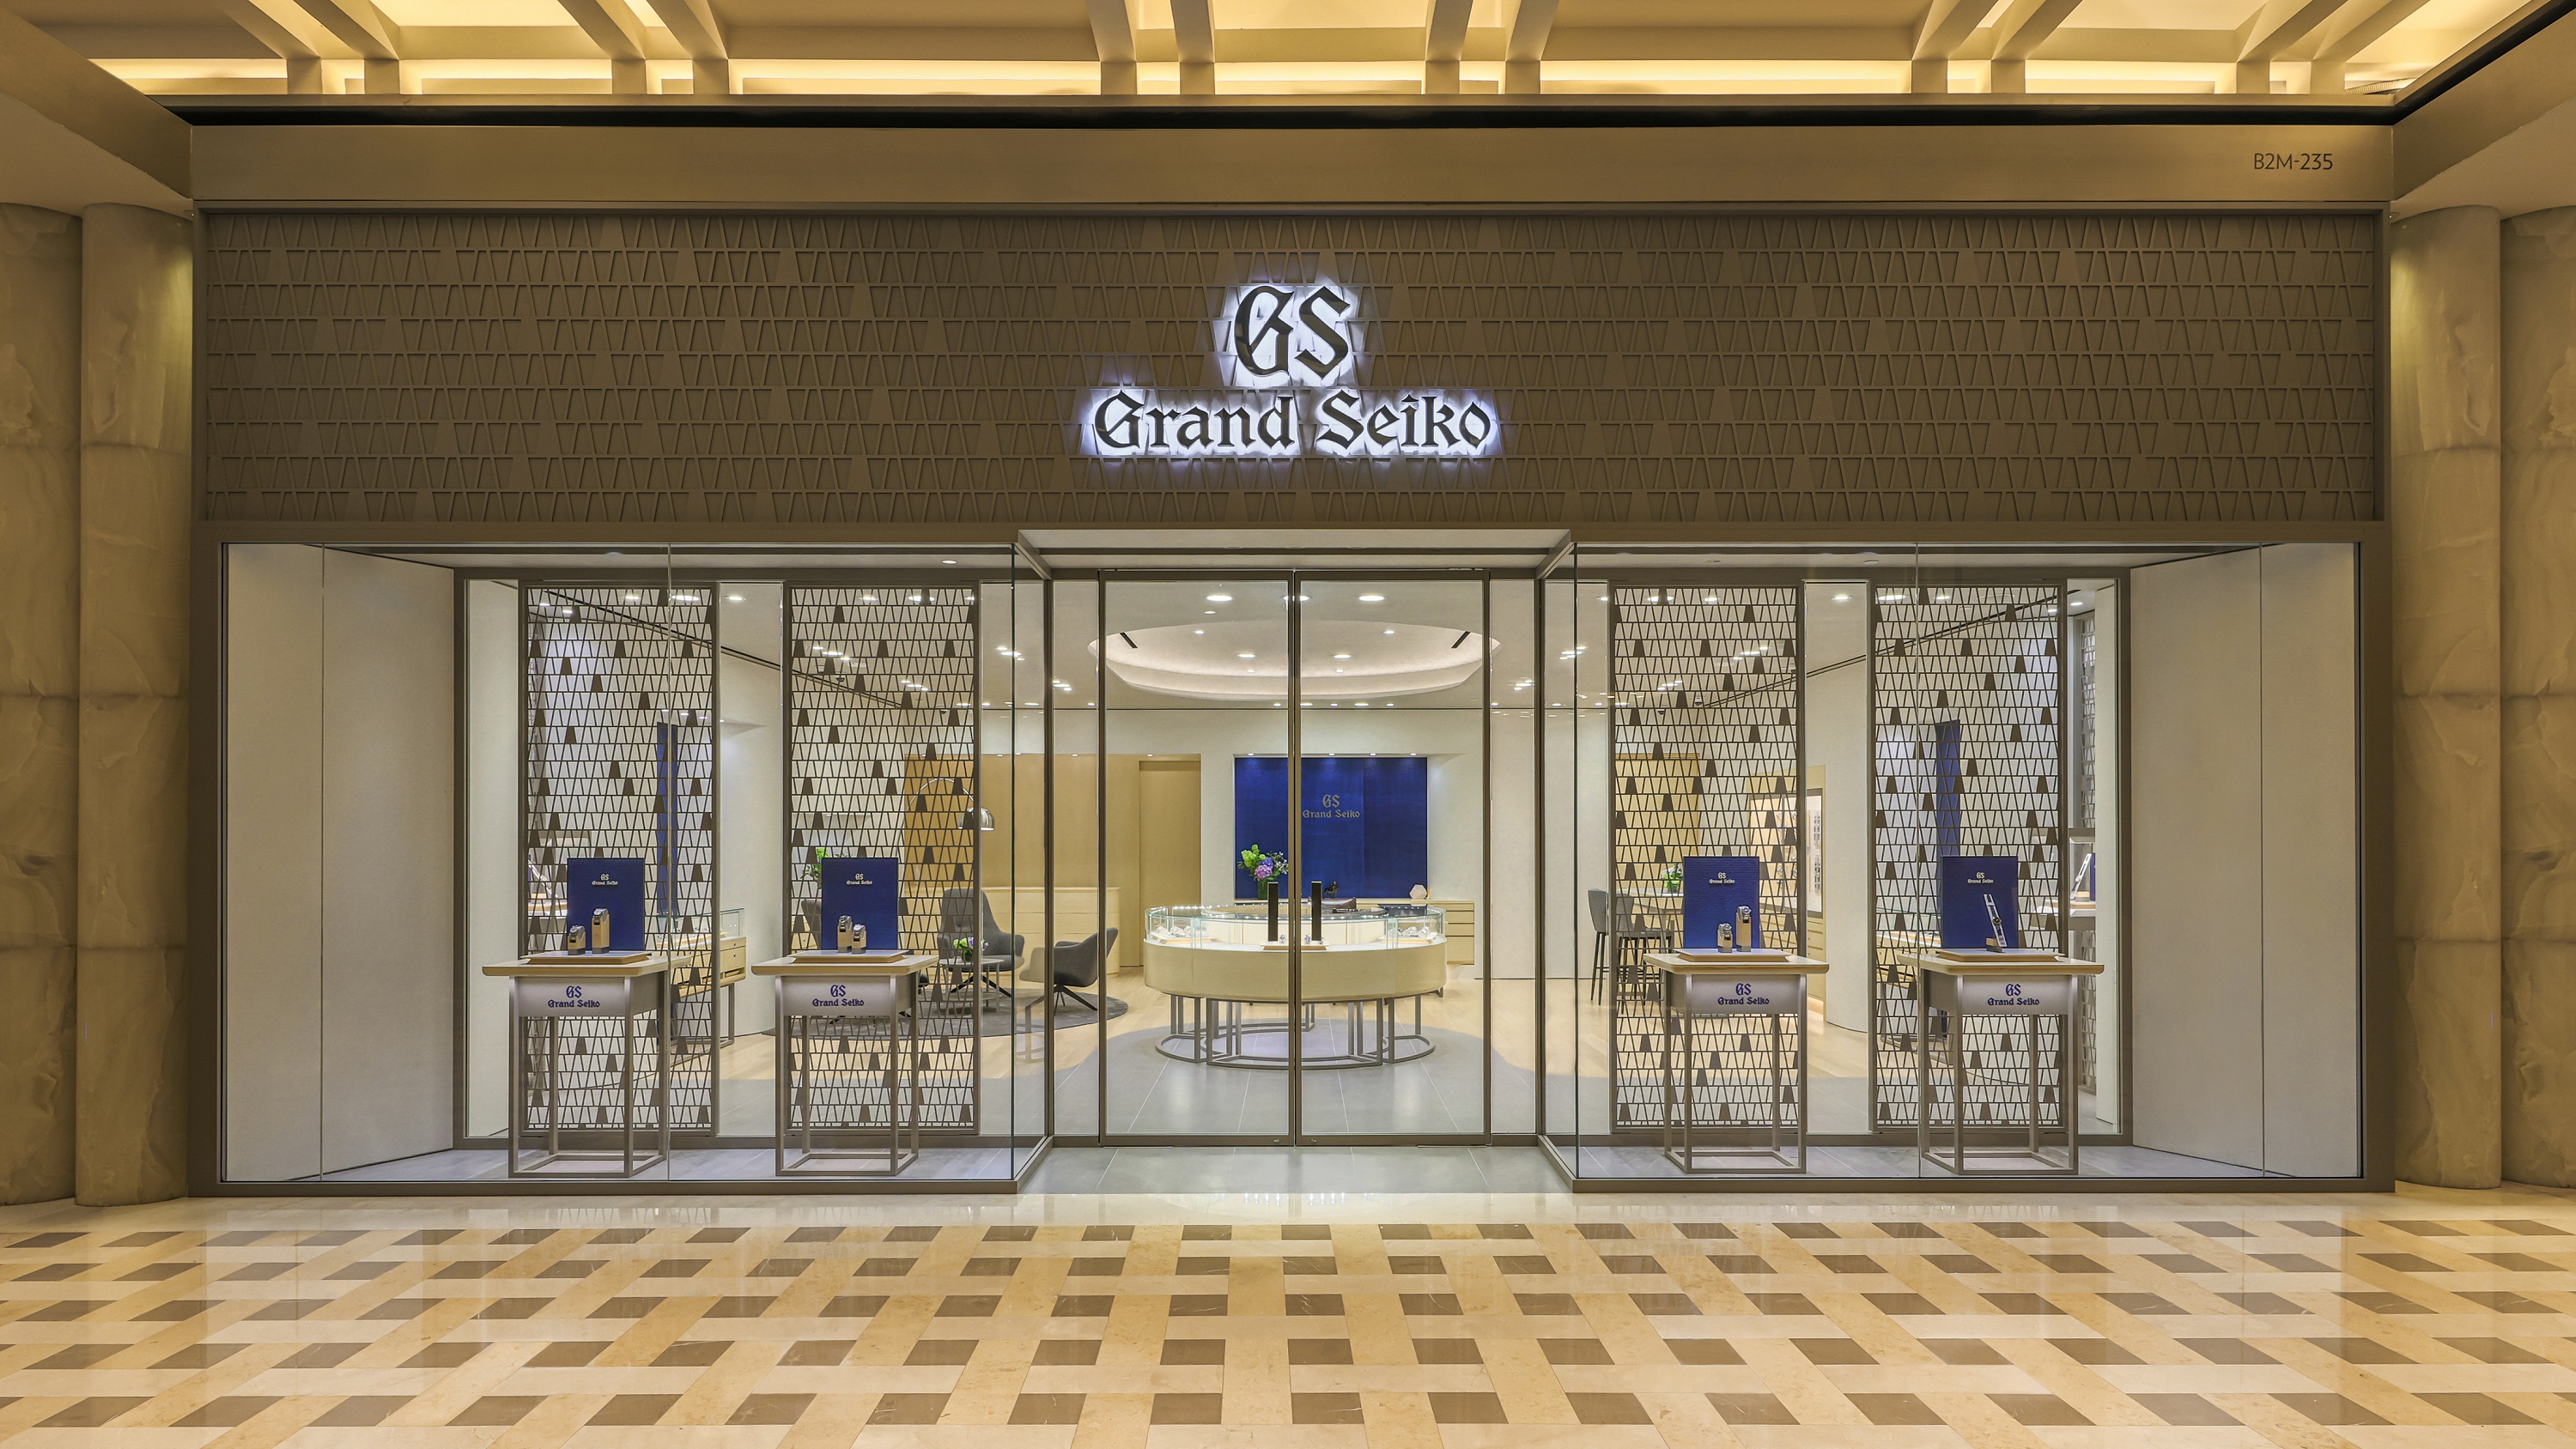 Grand Seiko Opens Its First Boutique in Singapore at Marina Bay Sands |  Seiko Watchのプレスリリース | 共同通信PRワイヤー